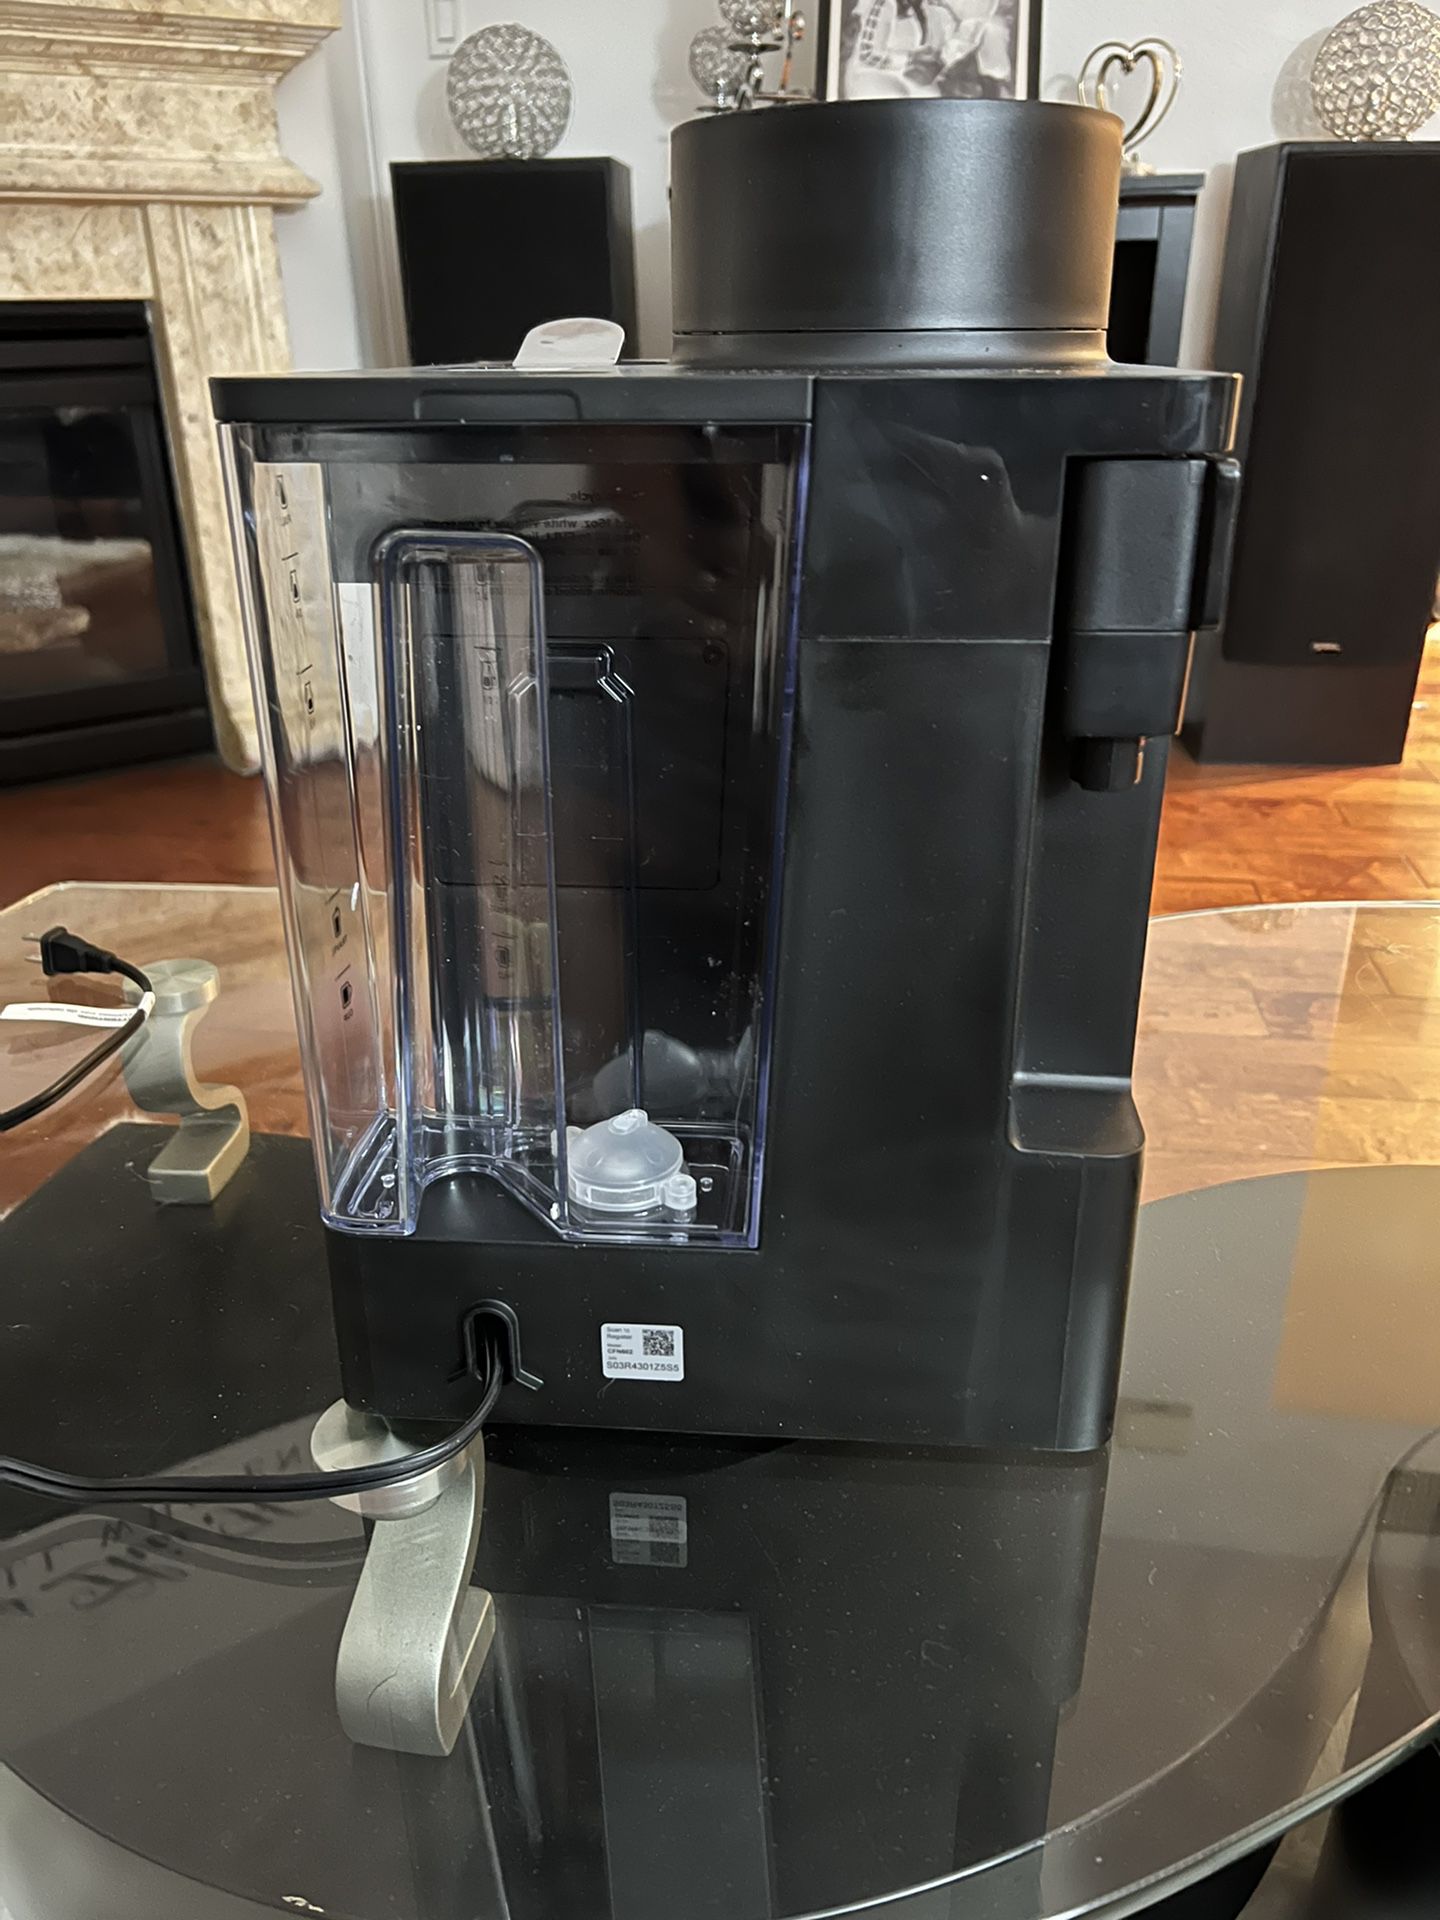 Ninja CFN601 Barista Coffee Maker With Frother for Sale in Irvine, CA -  OfferUp